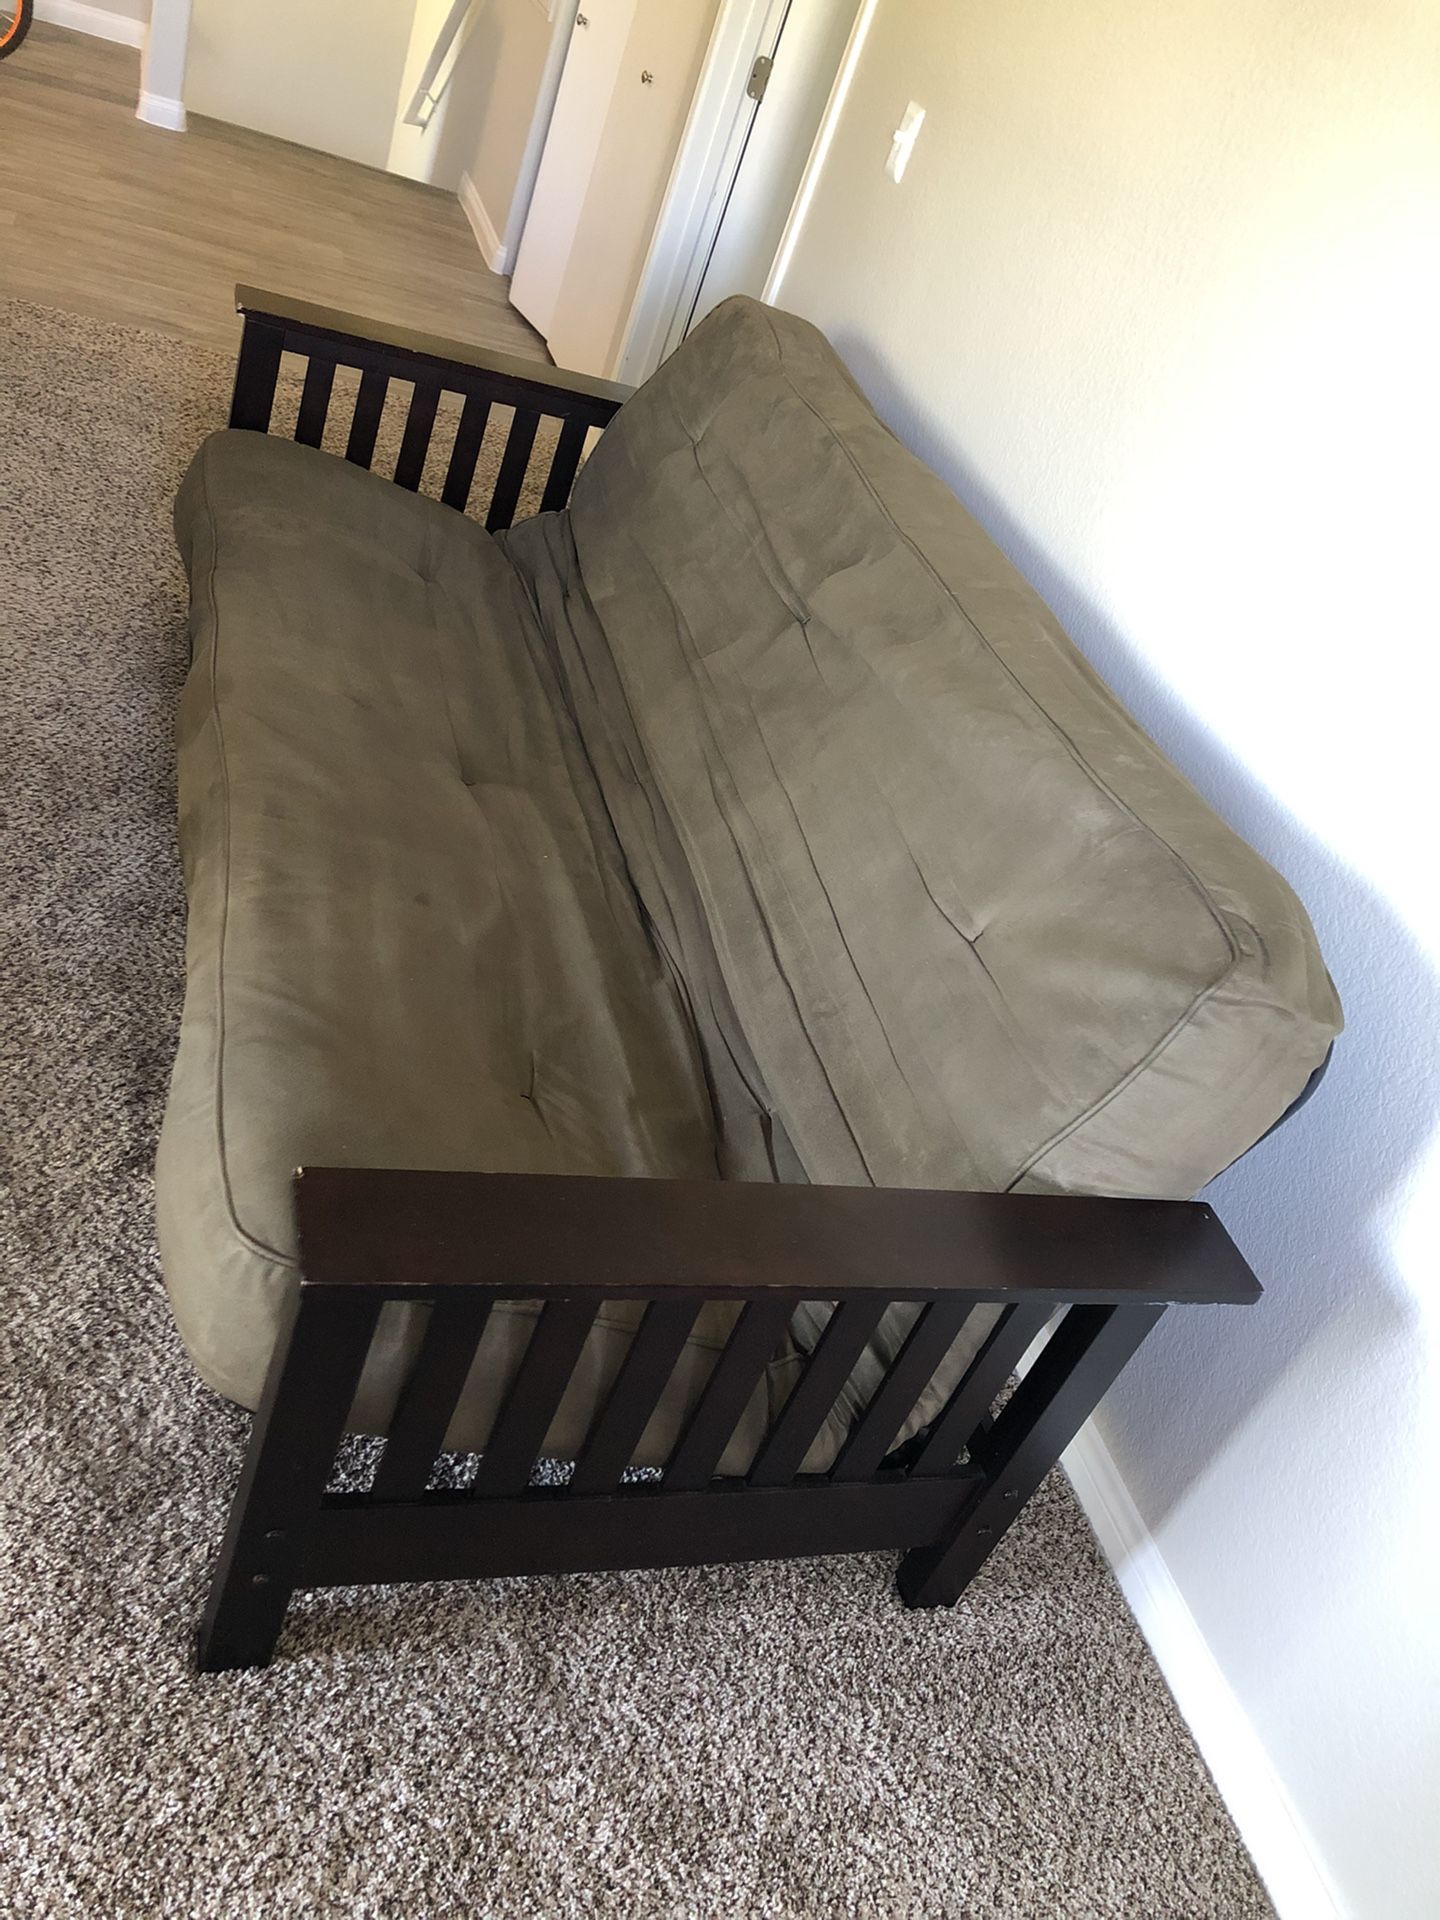 Futon Bed Couch